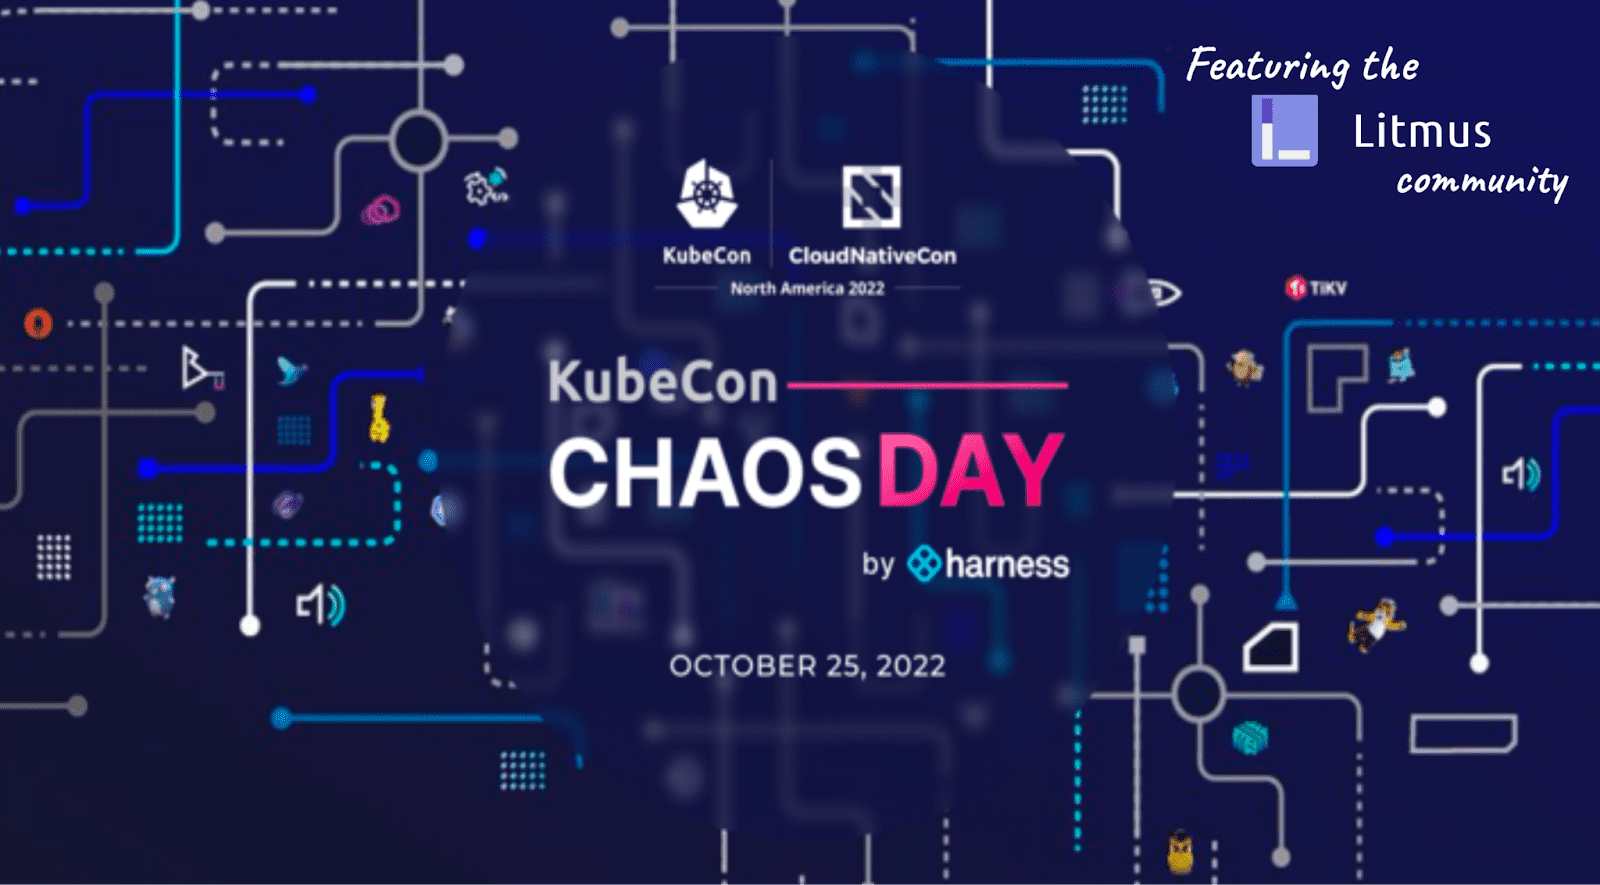 KubeCon Chaos Day by harness on October 25, 2022